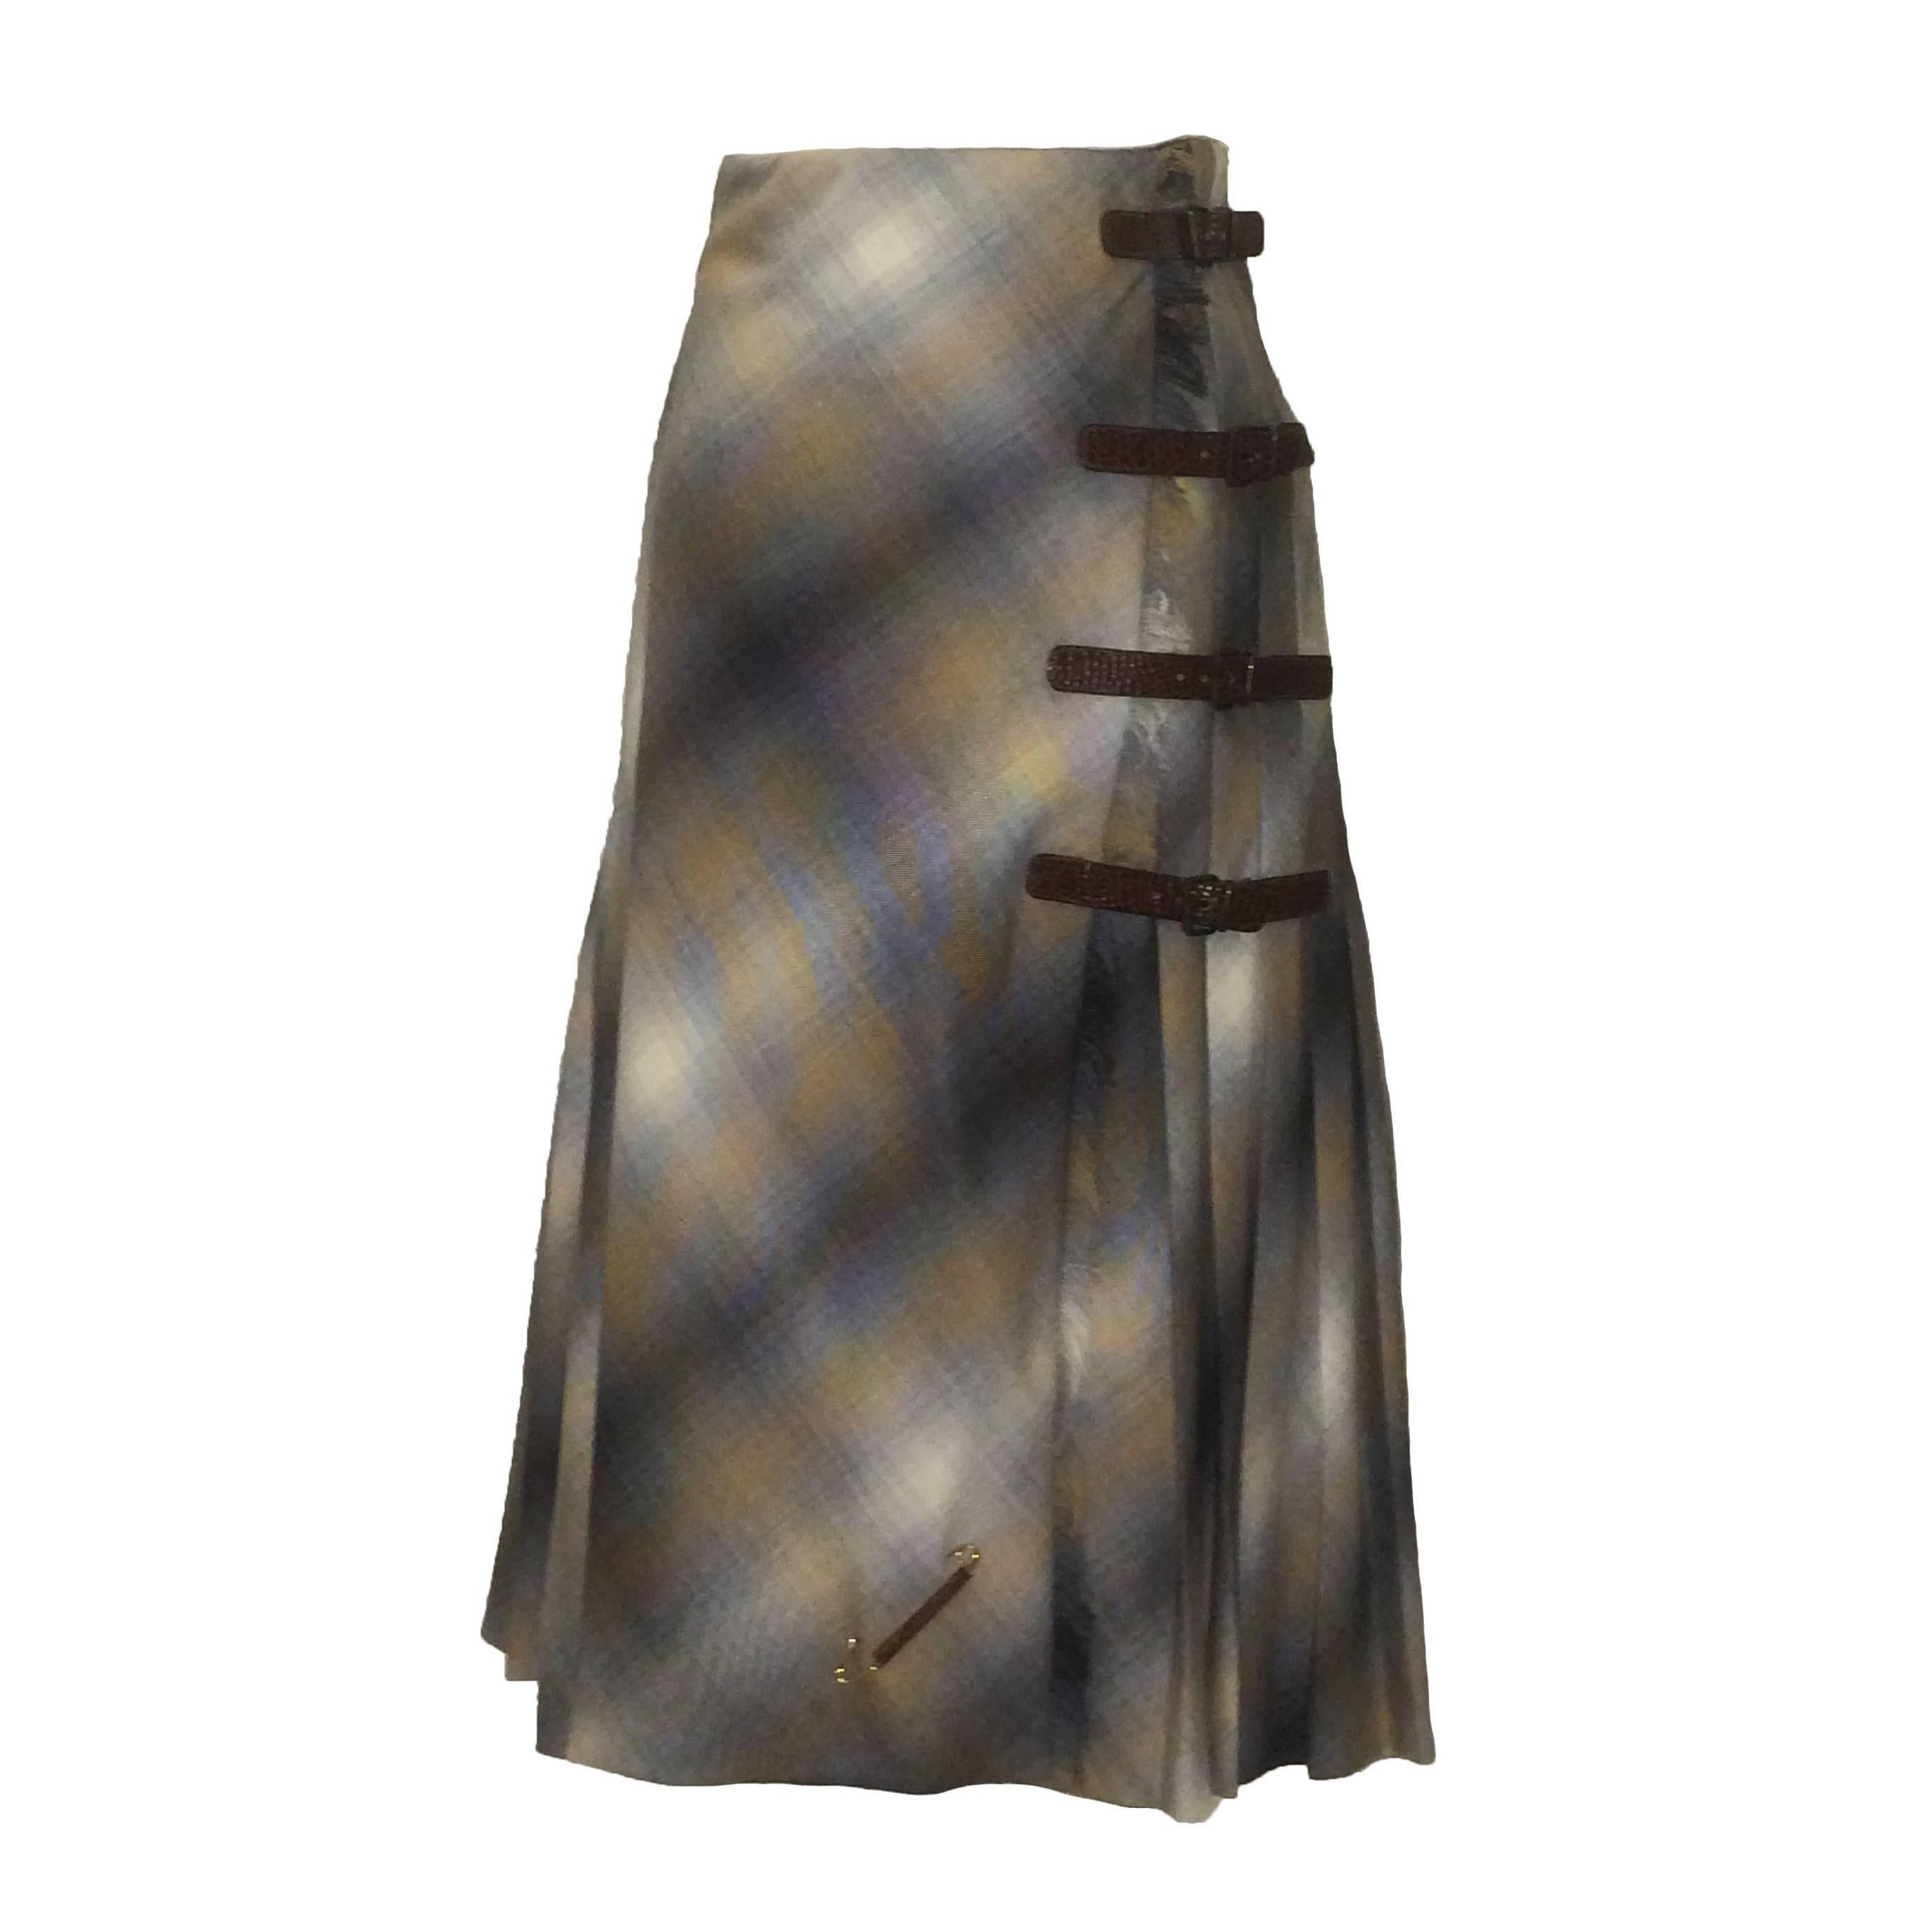 Alexander McQueen Fall 2005 Pleated Wool Plaid Skirt with Buckles